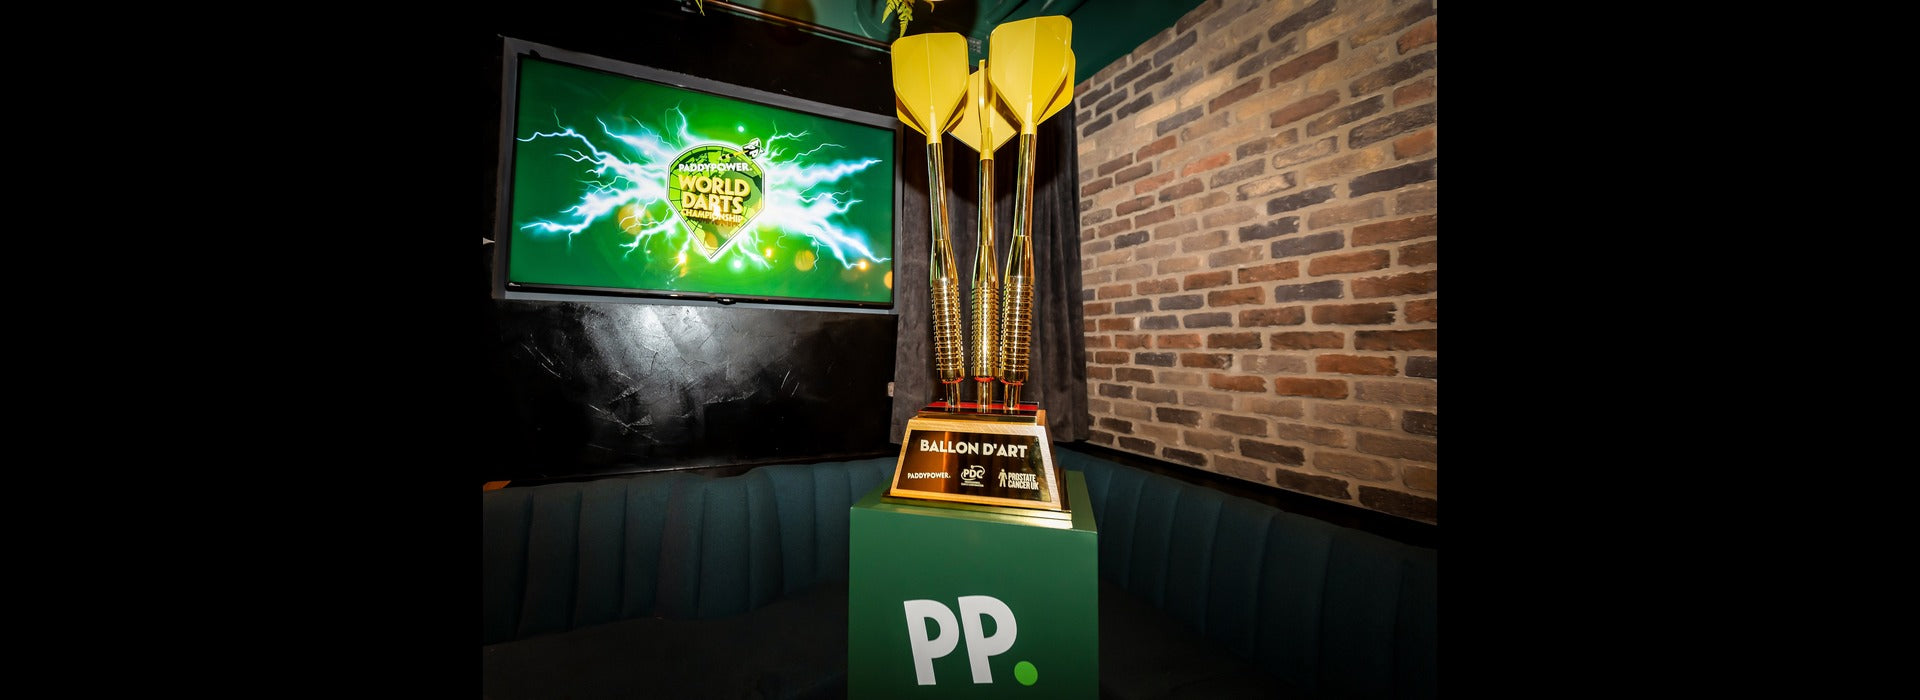 Move over Messi! Ballon d'Art trophy revealed by Paddy Power